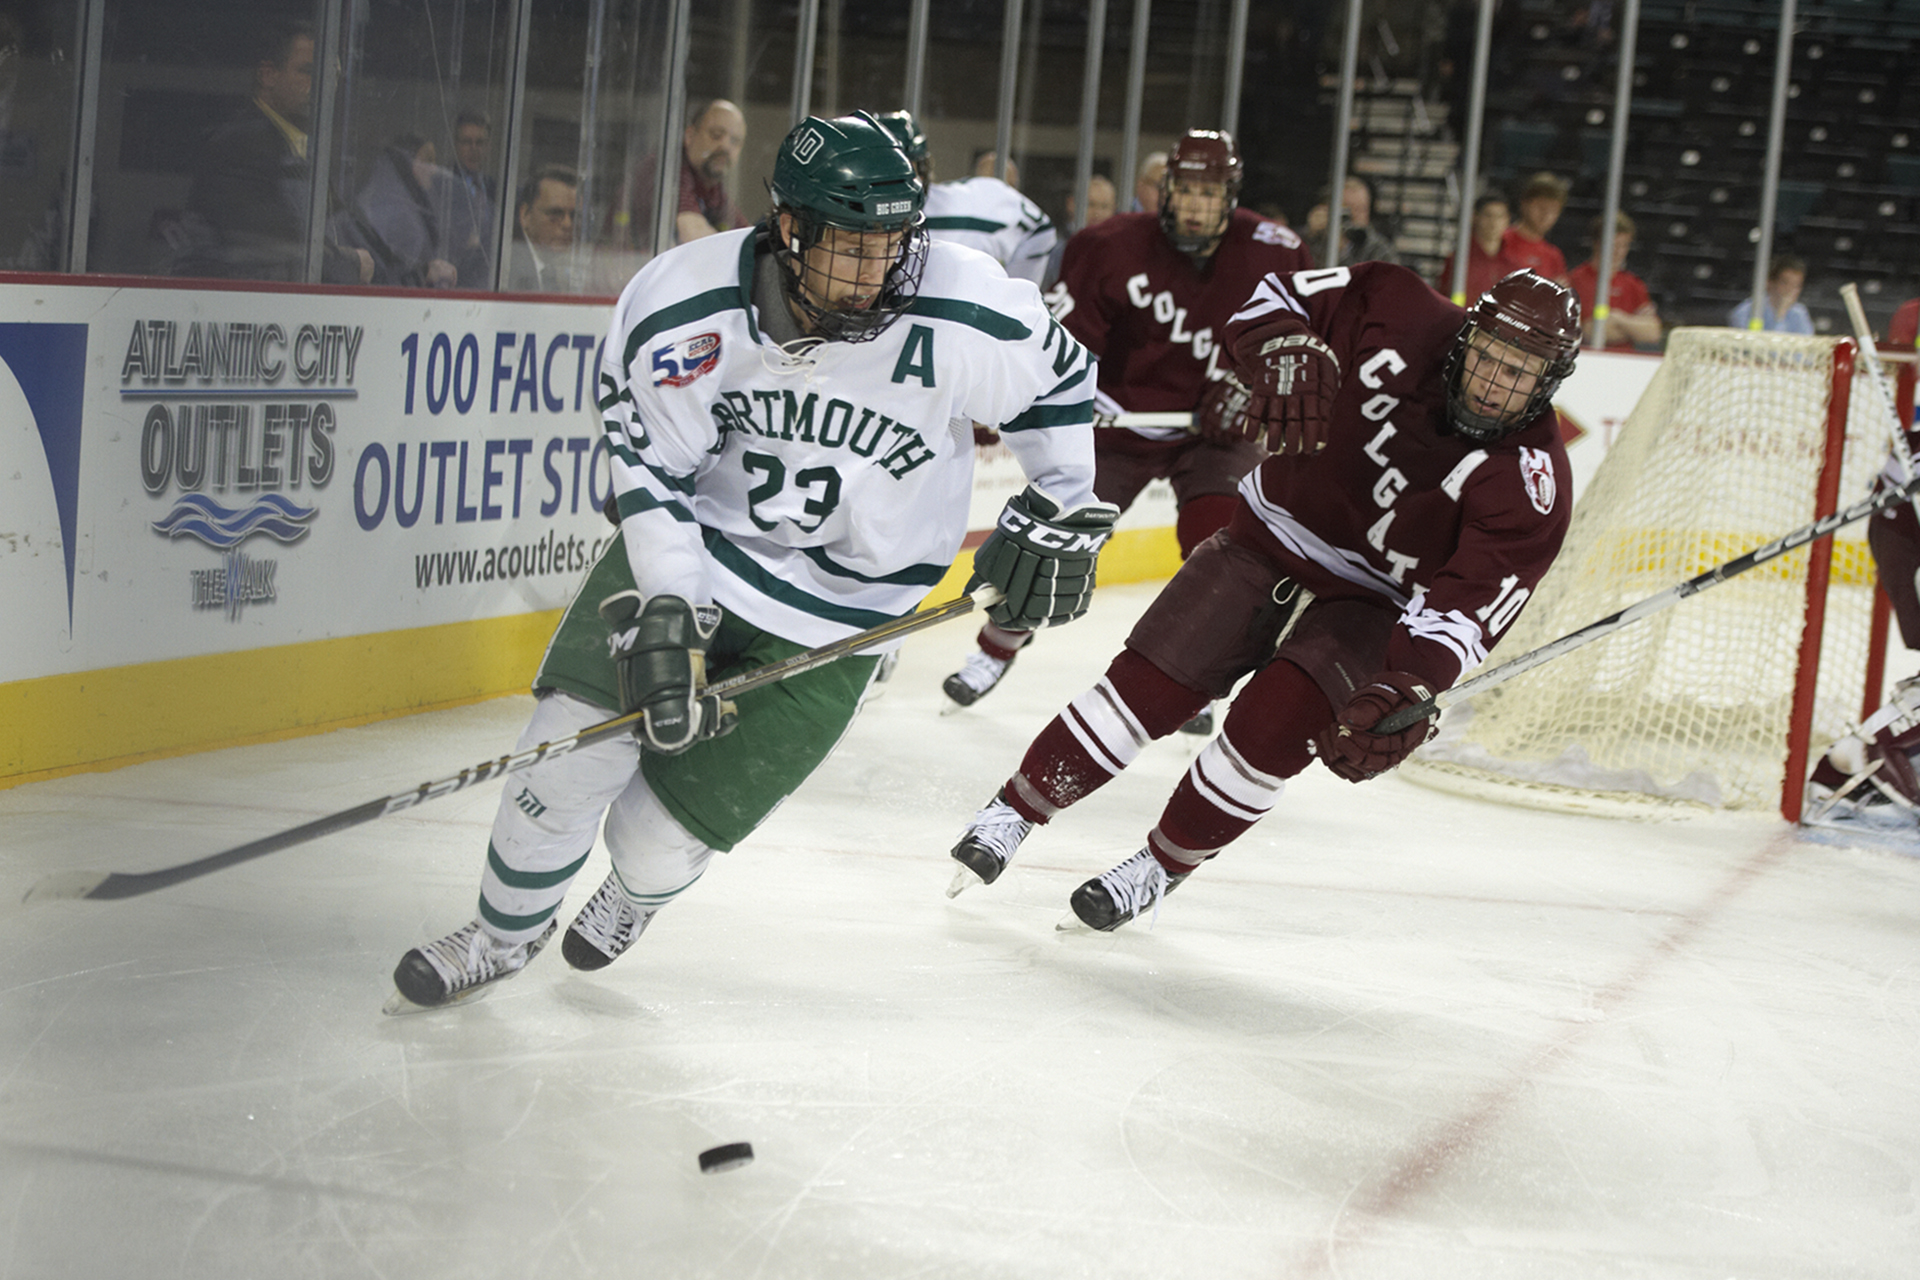 College Hockey: ECAC Hockey Tournament: Dartmouth Adam Estoclet (23) in action vs Colgate during 3rd Place Game at Boardwalk Hall.Atlantic City, NJ 3/19/2011CREDIT: Lou Capozzola (Photo by Lou Capozzola /Sports Illustrated/Getty Images)(Set Number: X85650 TK1 R6 F19 )